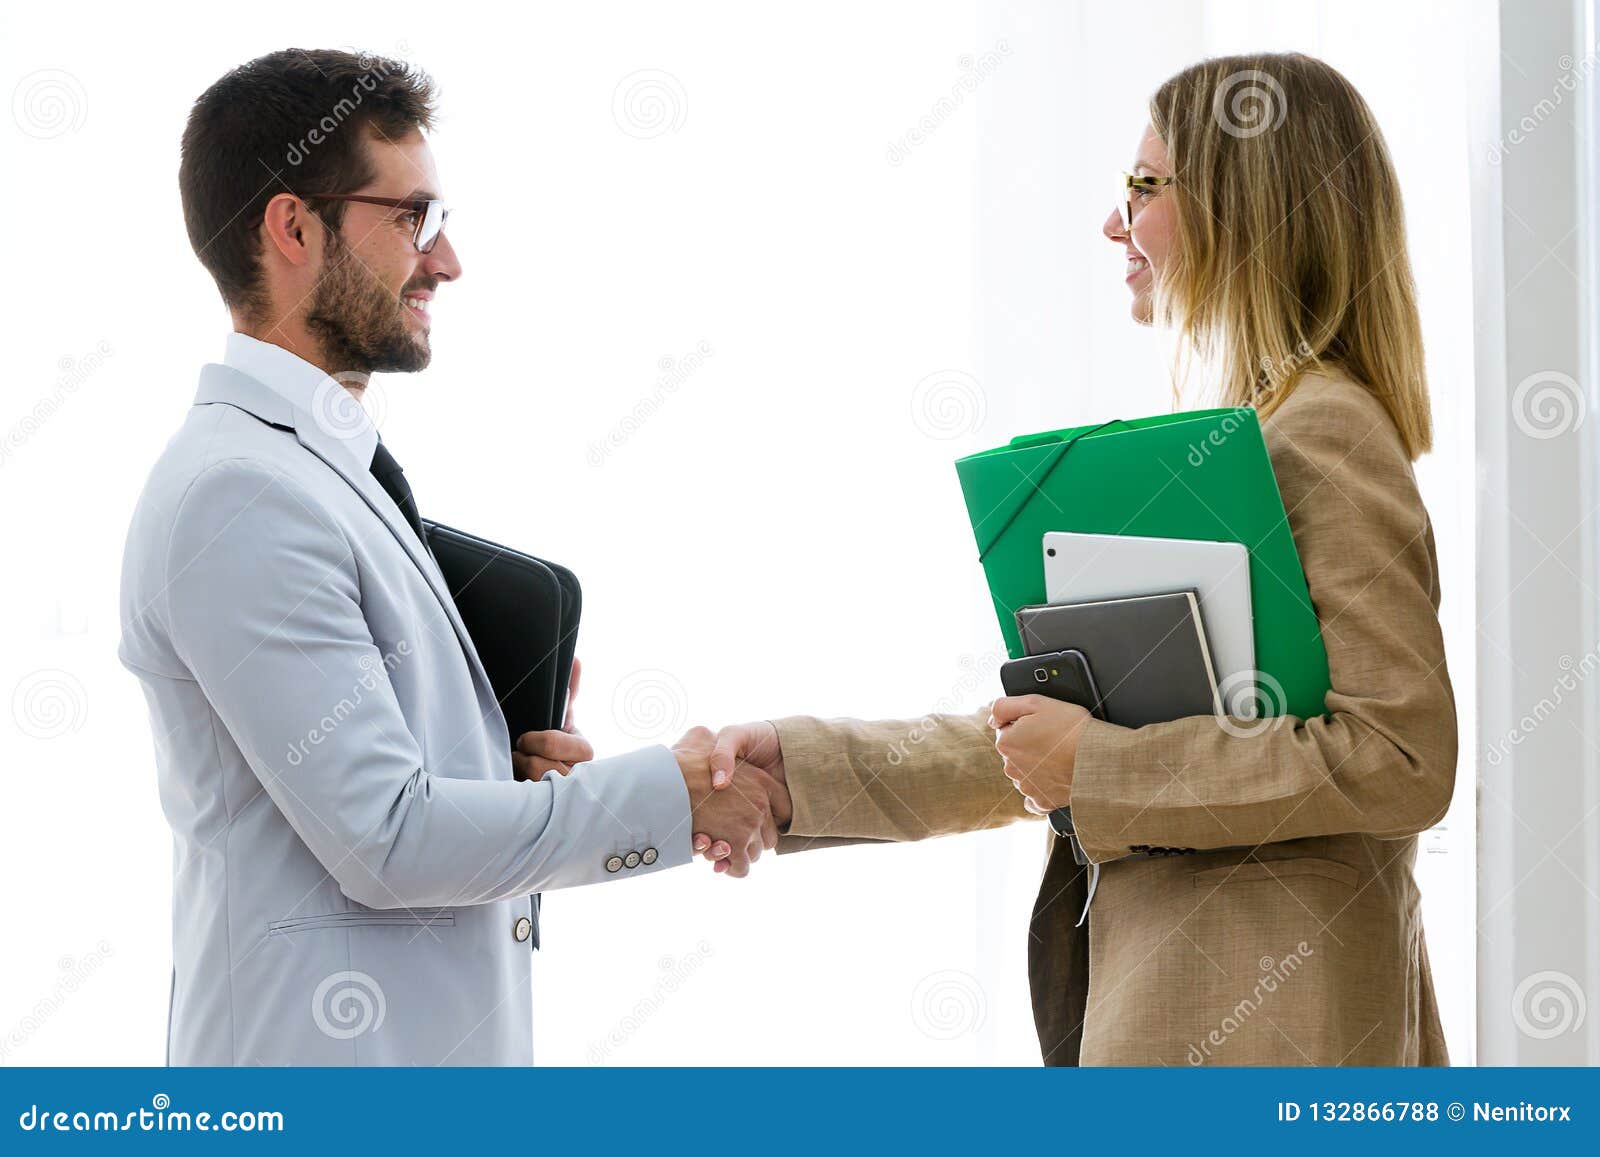 two attractive bussines partners shaking their hands in the office.